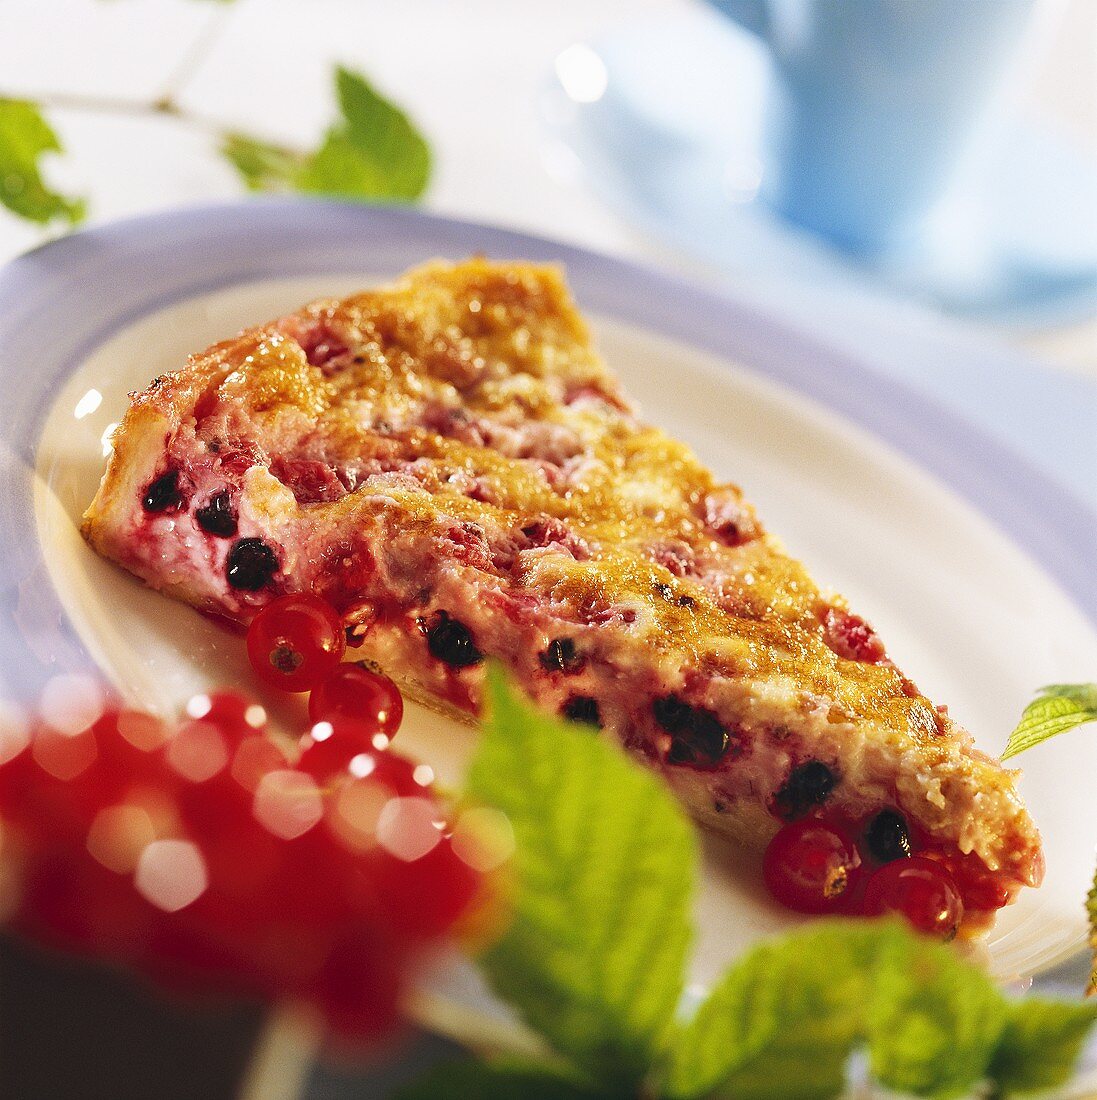 A piece of redcurrant tart with glaze on plate